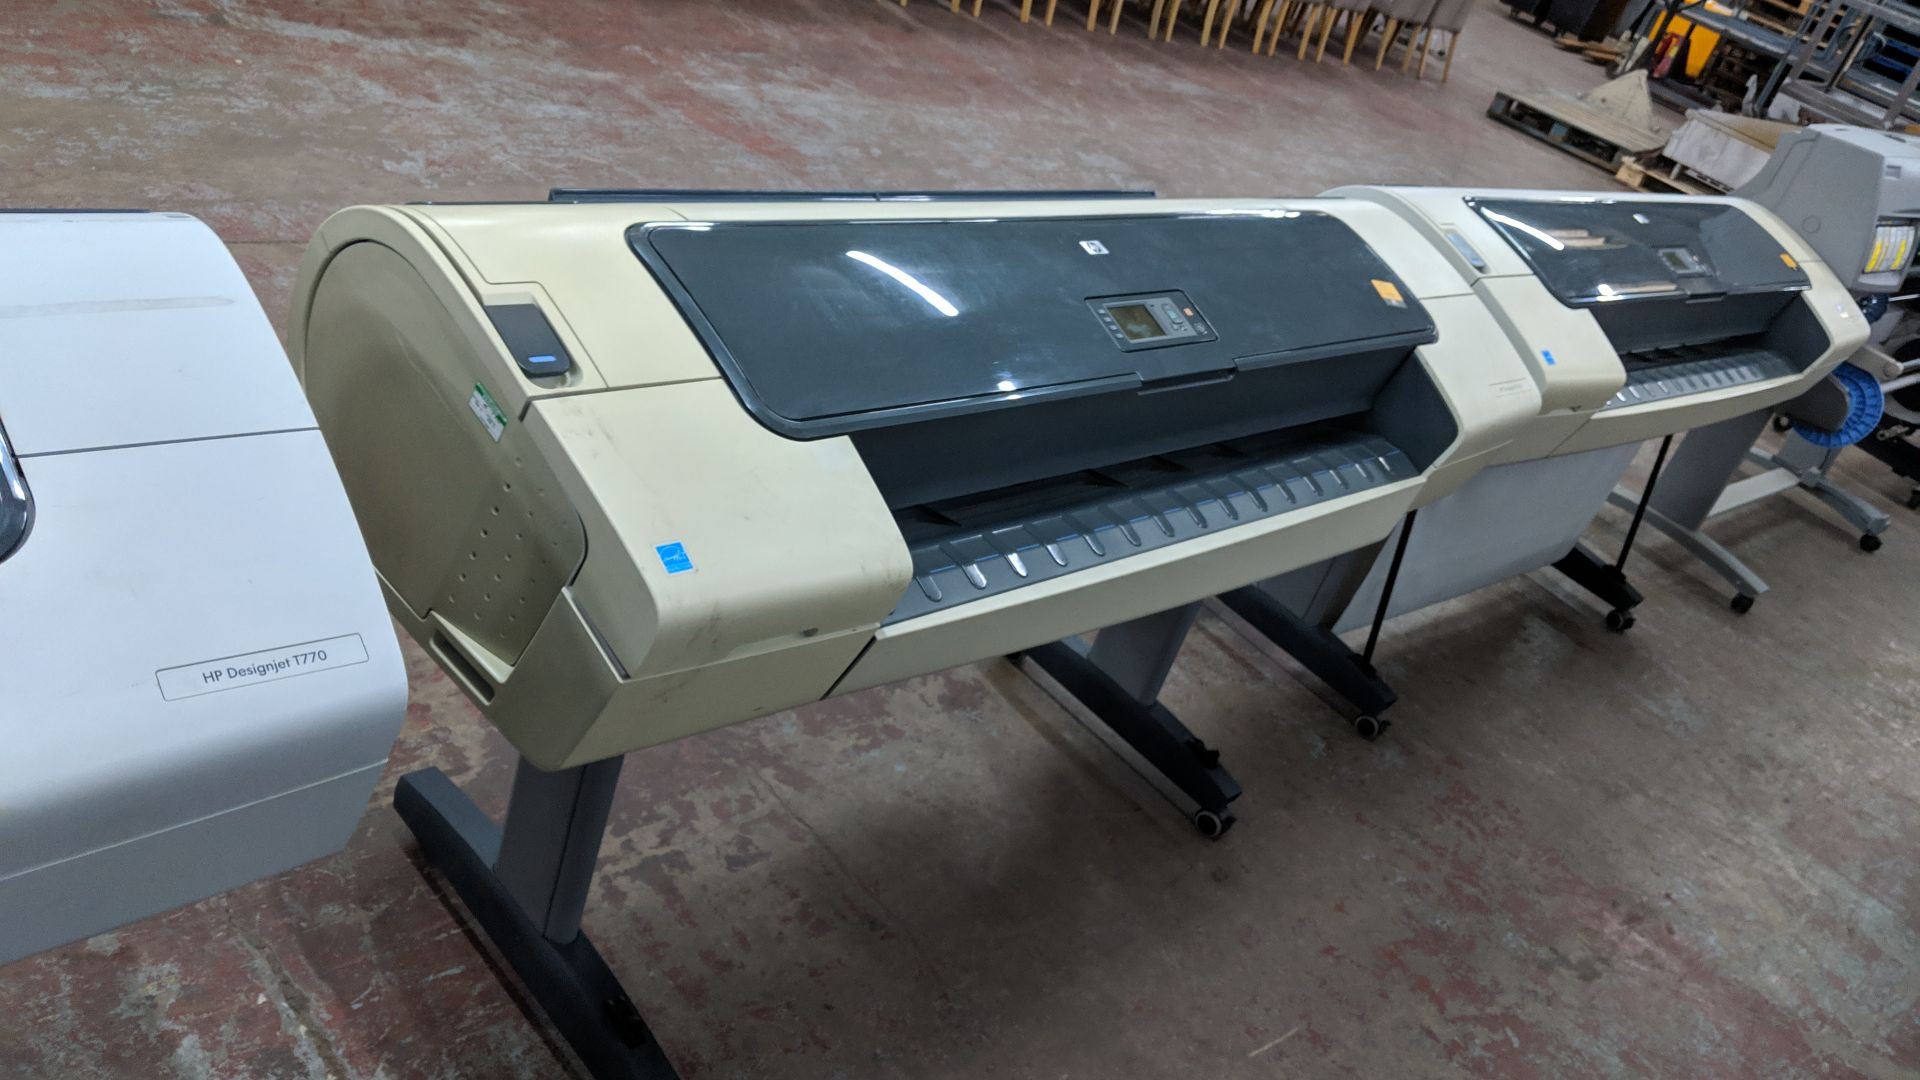 HP DesignJet T610 44" wide format printer, serial no. MY76J0C03W, factory model Q6712A IMPORTANT: - Image 3 of 8